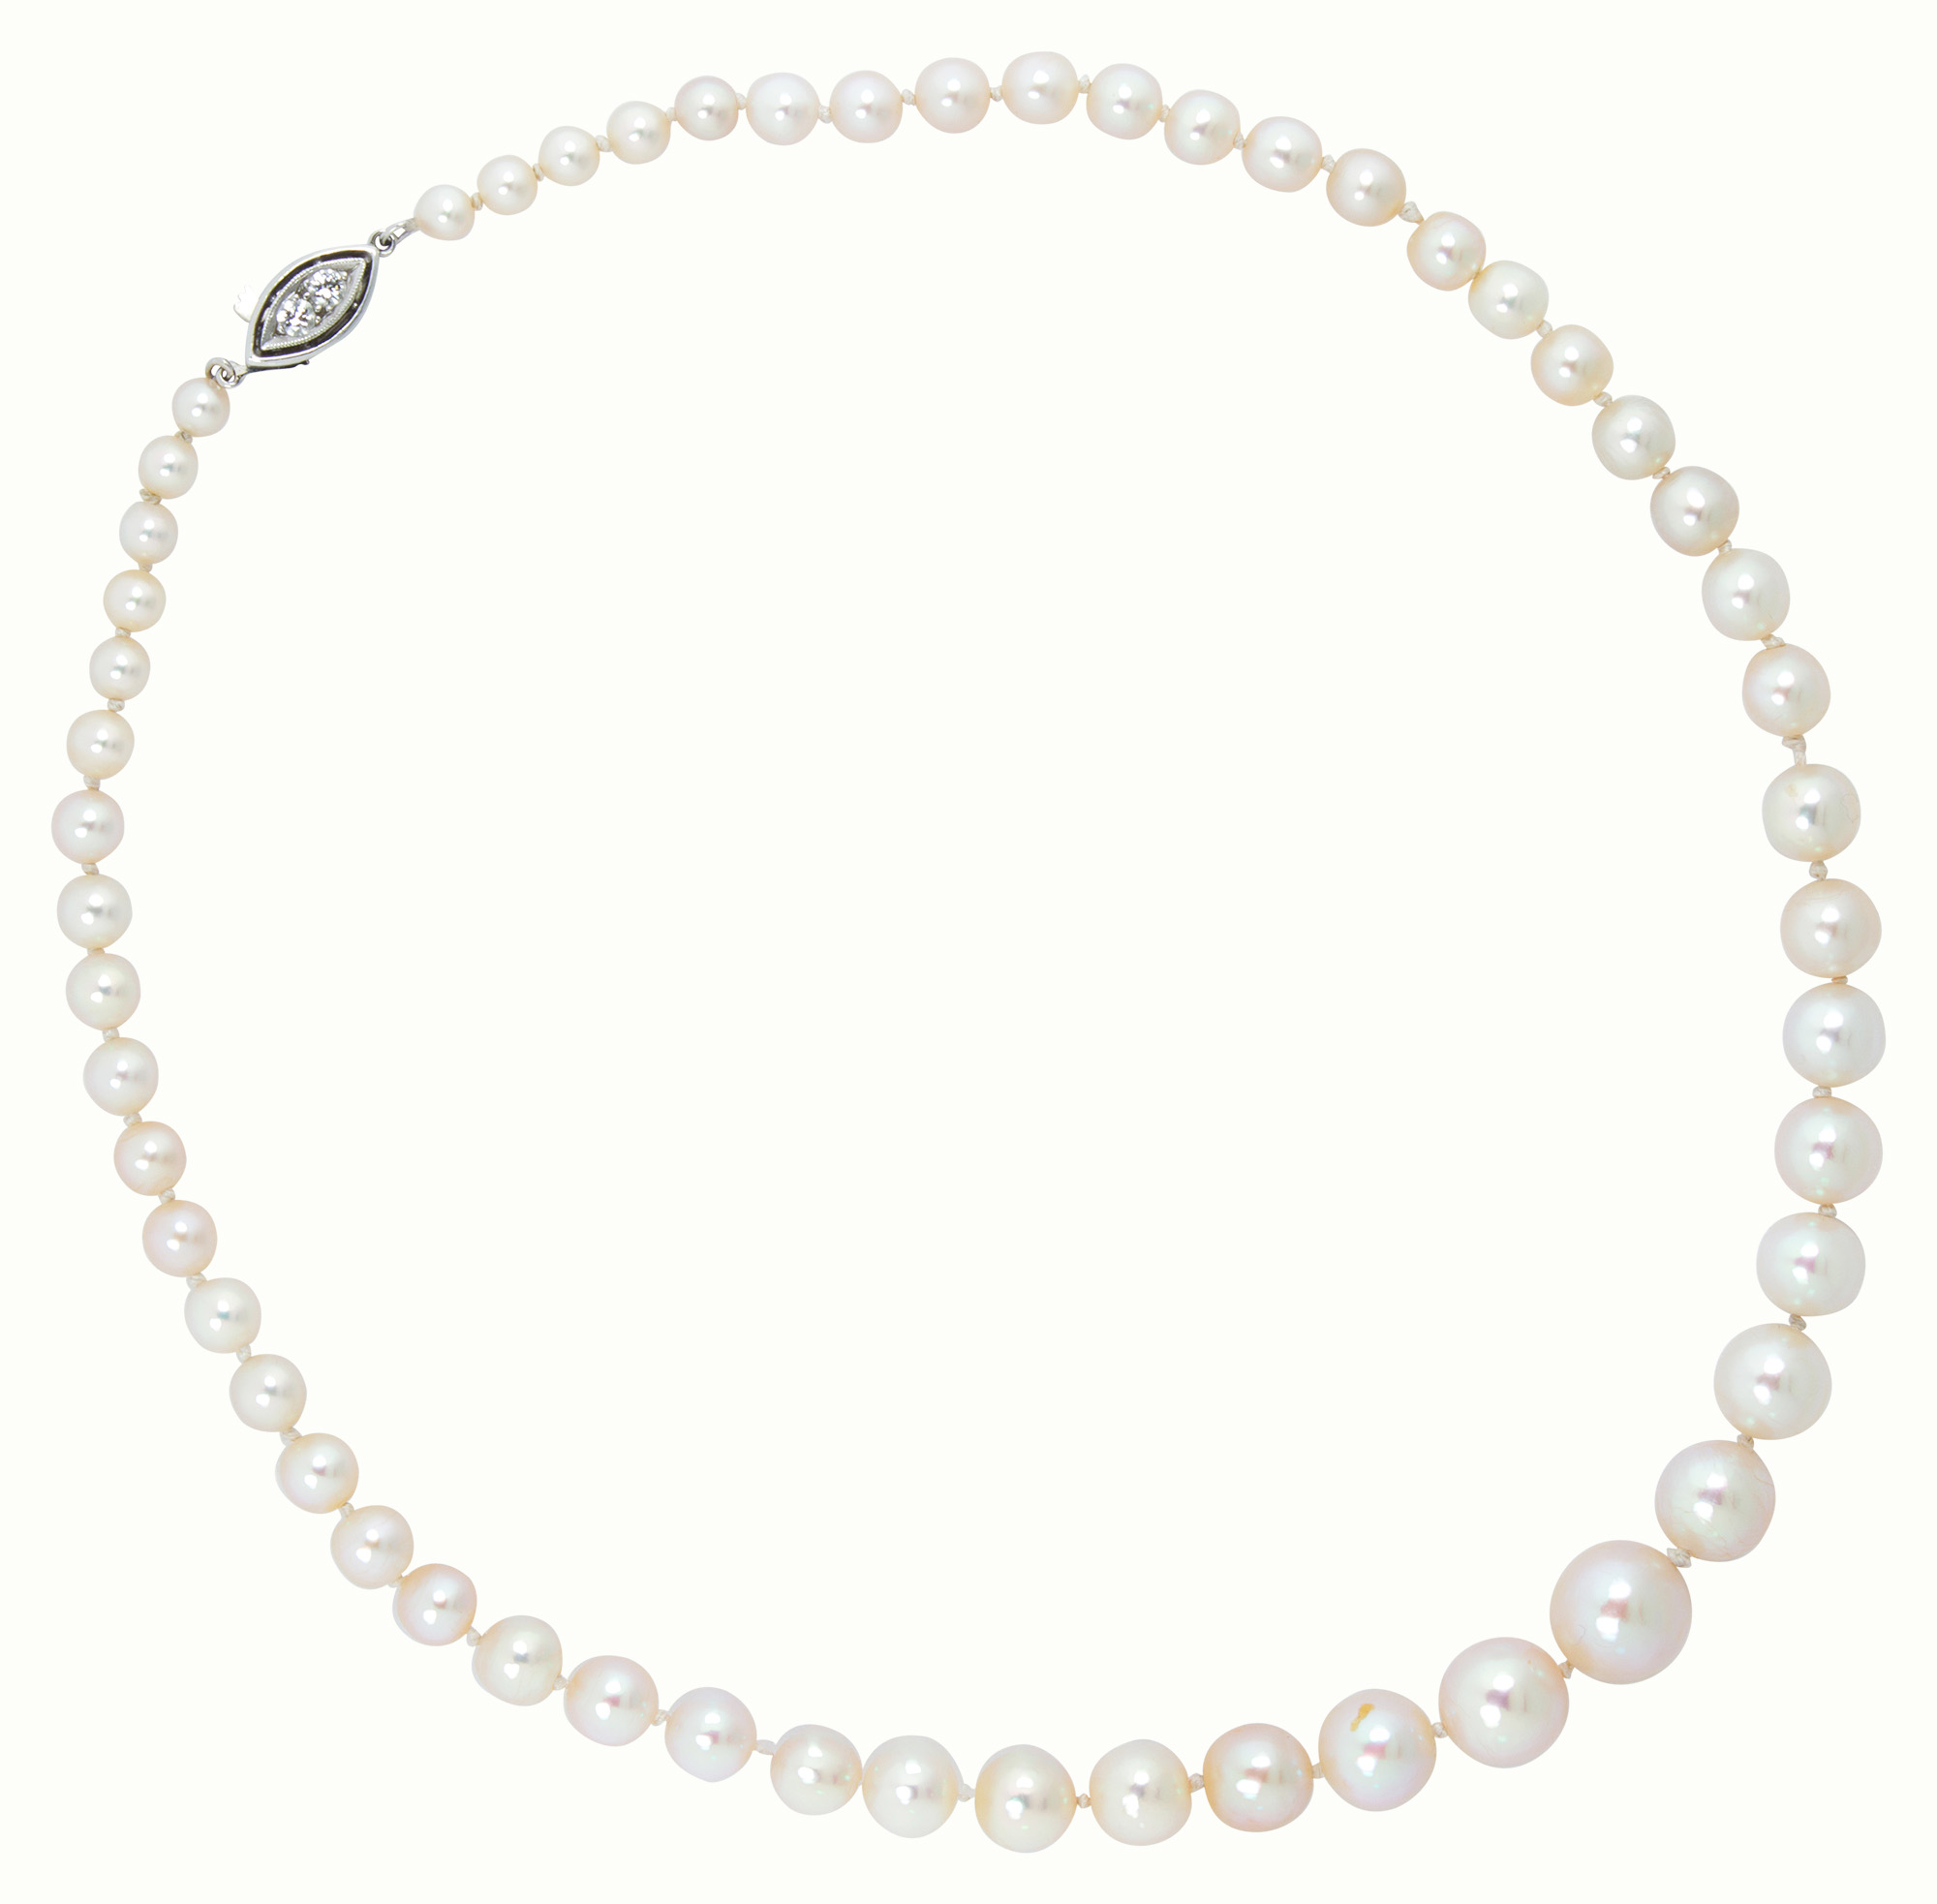 A natural pearl, diamond and platinum necklace. 